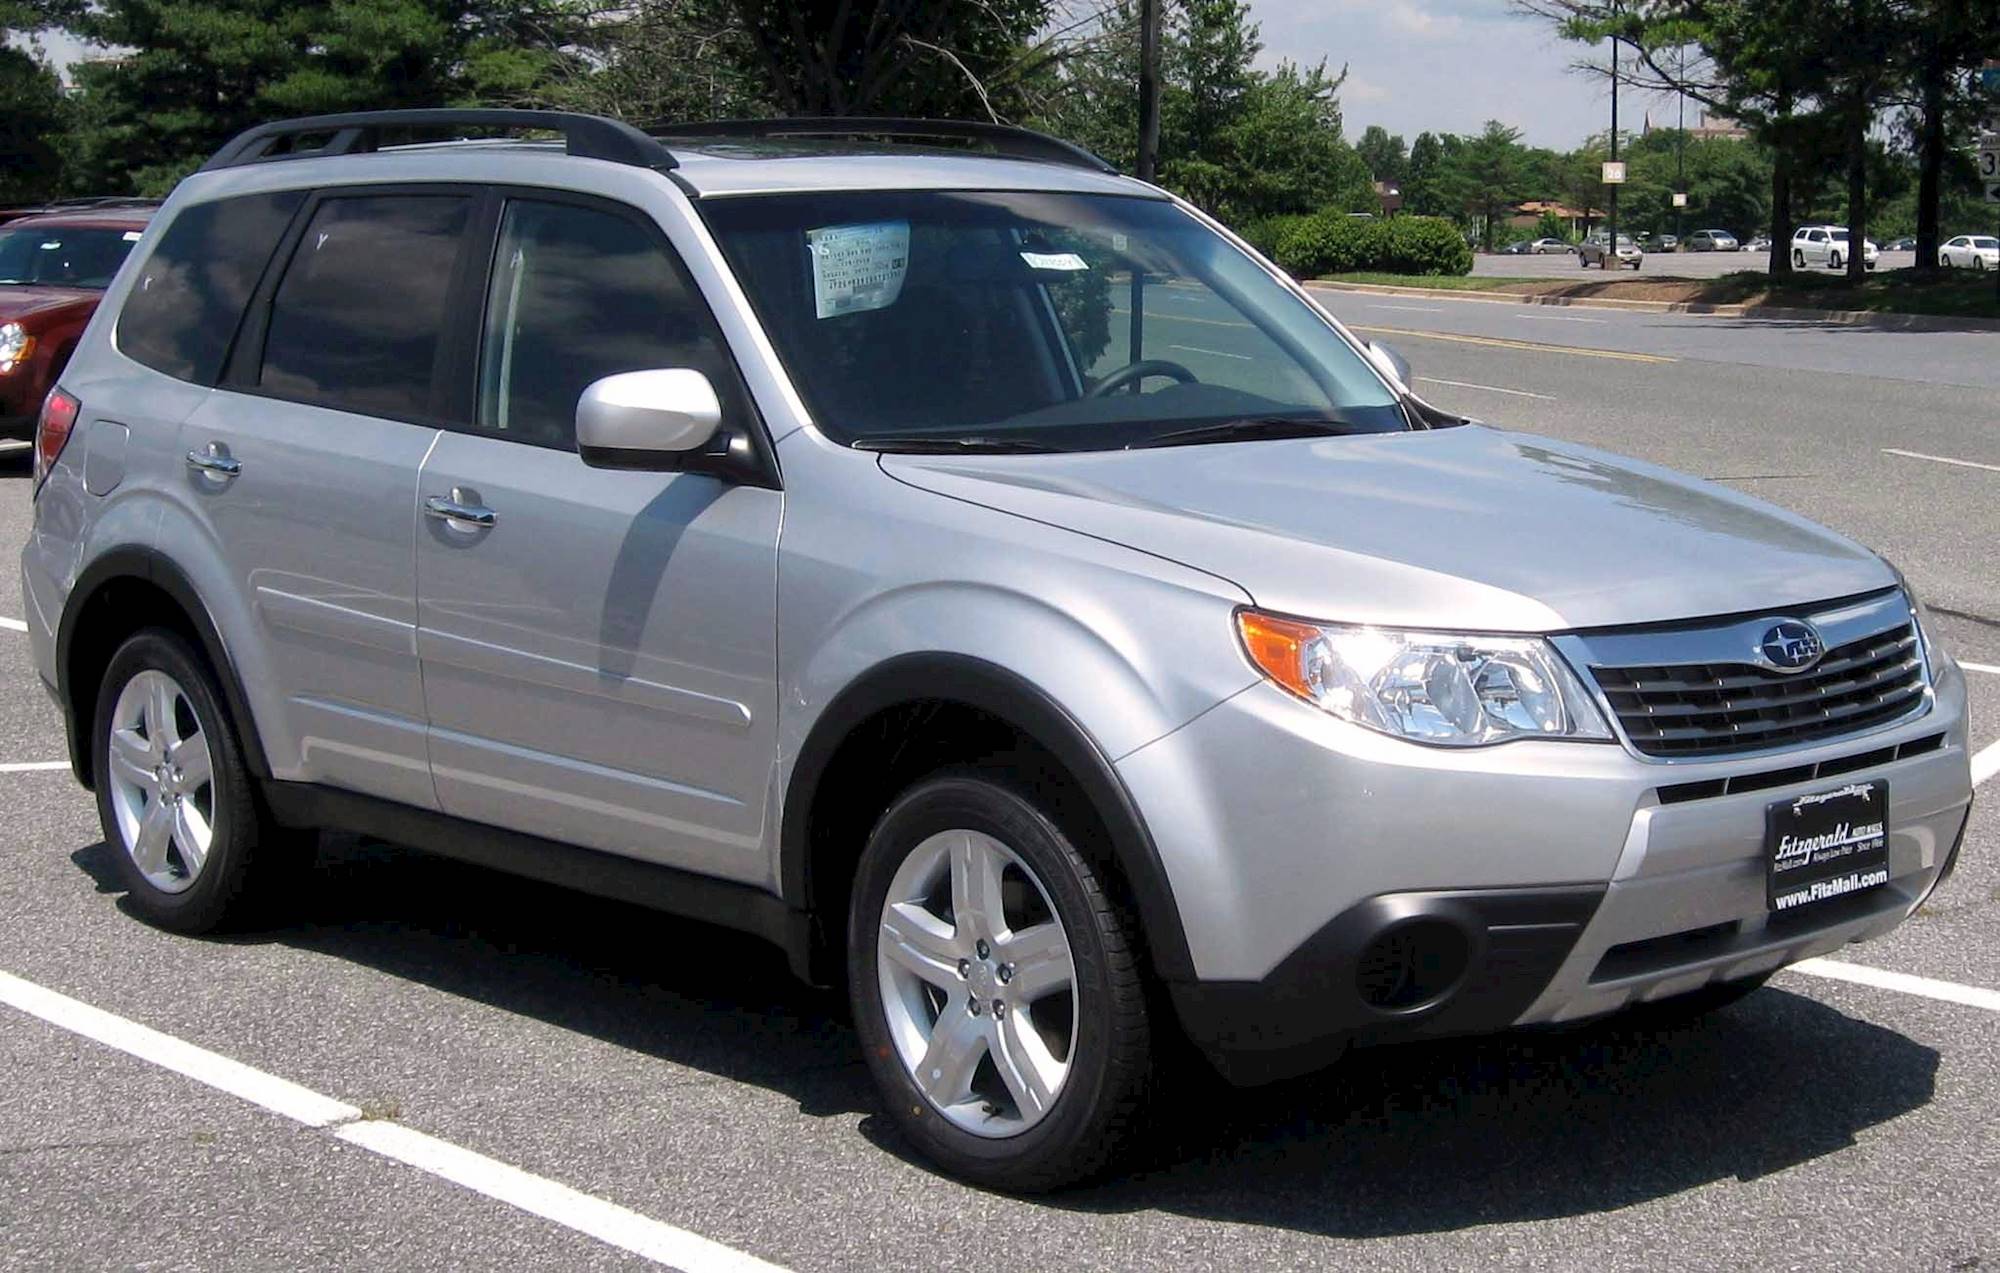 2009 Subaru Forester 2.5X Limited - 4dr SUV 2.5L AWD auto w/VDC, Nav 2009 Subaru Forester 2.5 X Towing Capacity